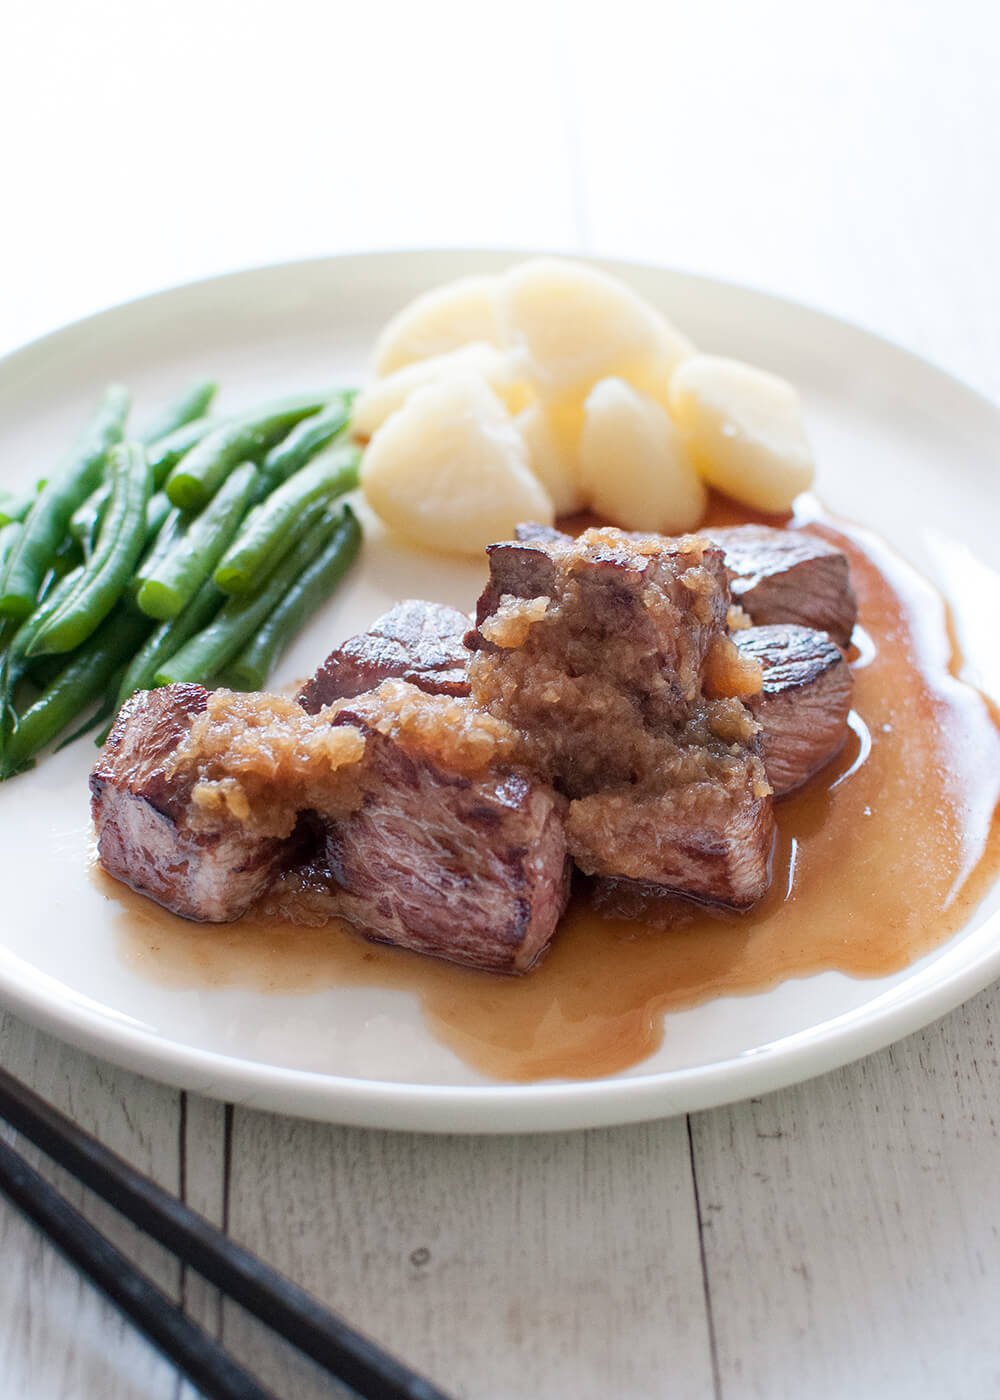 Bite-sized beef steak, Diced Beef Steak is a Japanese invention, easy to pick up with chopsticks. Both sauces are soy-based – one with wasabi flavour, the other one with grated onion, apple and garlic. It is so fast to cook!